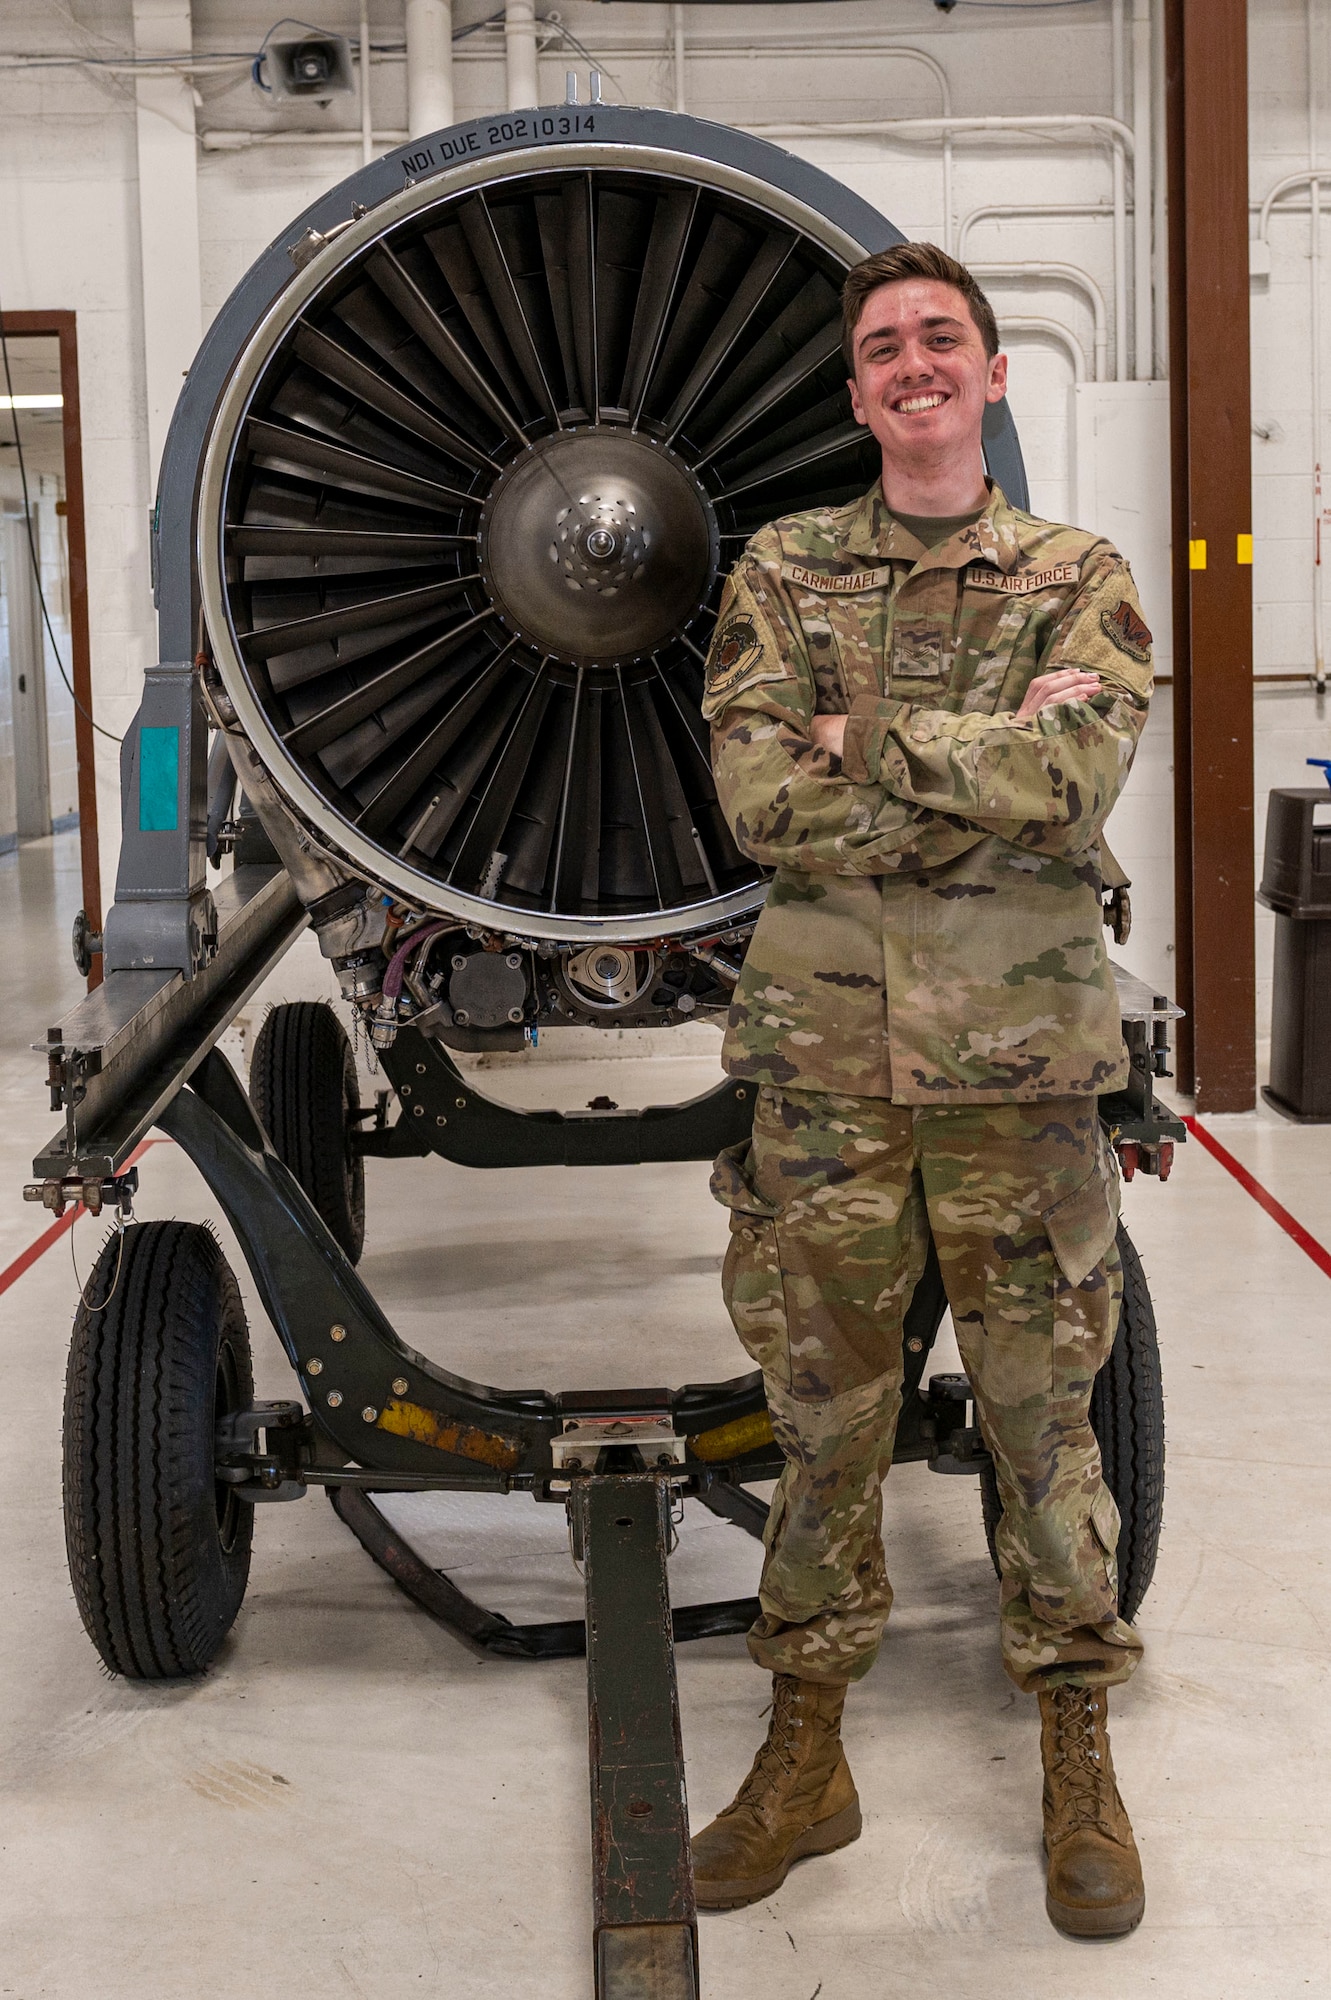 Airman 1st Class Alasdair Carmichael, 4th Component Maintenance Squadron aerospace propulsion journeyman, poses with an F-15E Strike Eagle engine at Seymour Johnson Air Force Base, North Carolina, July, 13, 2022. Carmichael is from Denny, Scotland and joined the U.S. Air Force to pursue his career goal and become an astronaut. (U.S. Air Force photo by Airman 1st Class Sabrina Fuller)